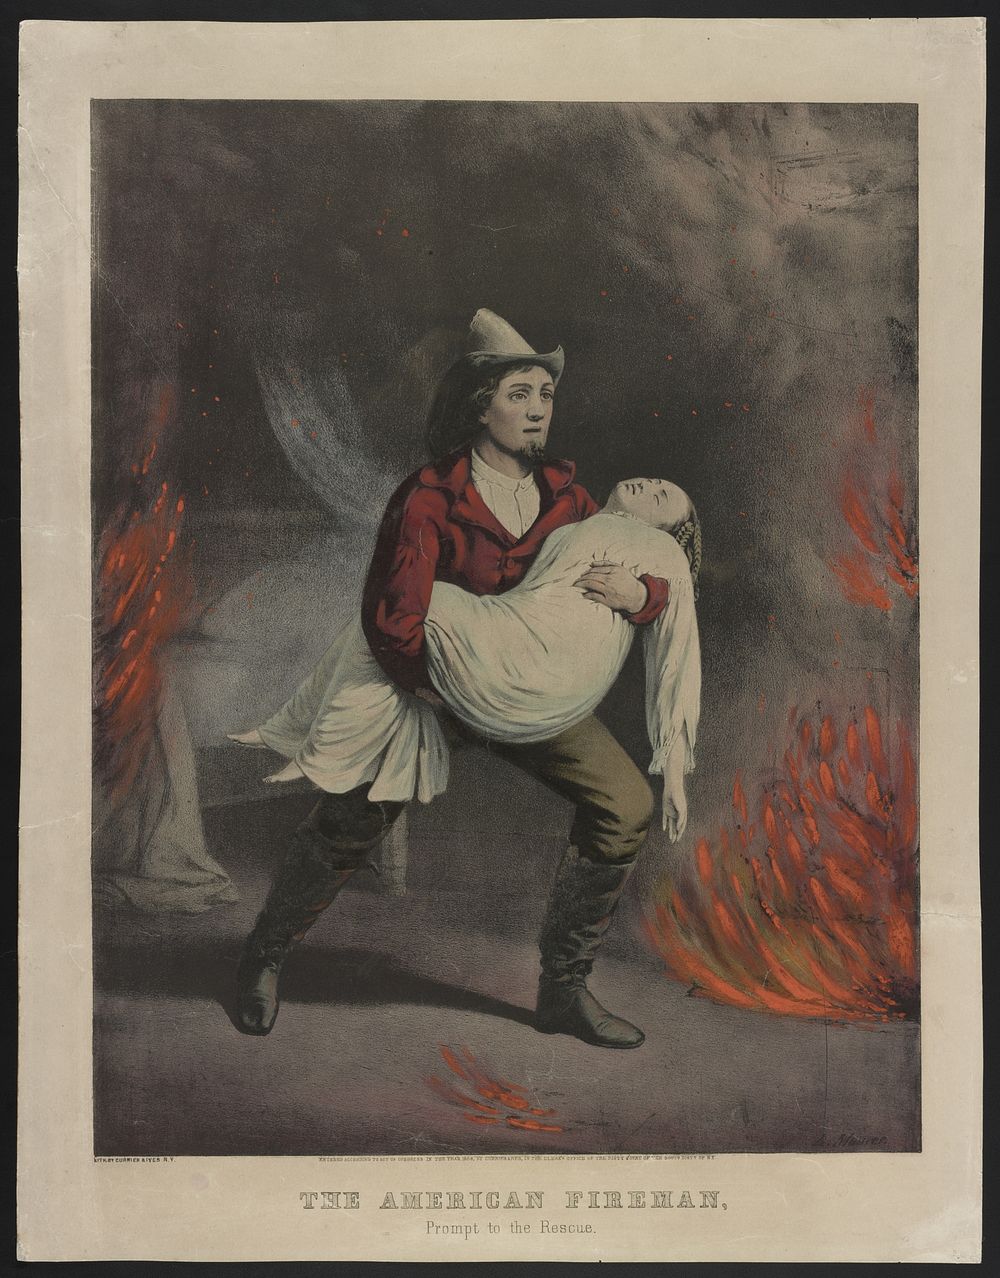 The American fireman: prompt to the rescue (1858) by Currier & Ives